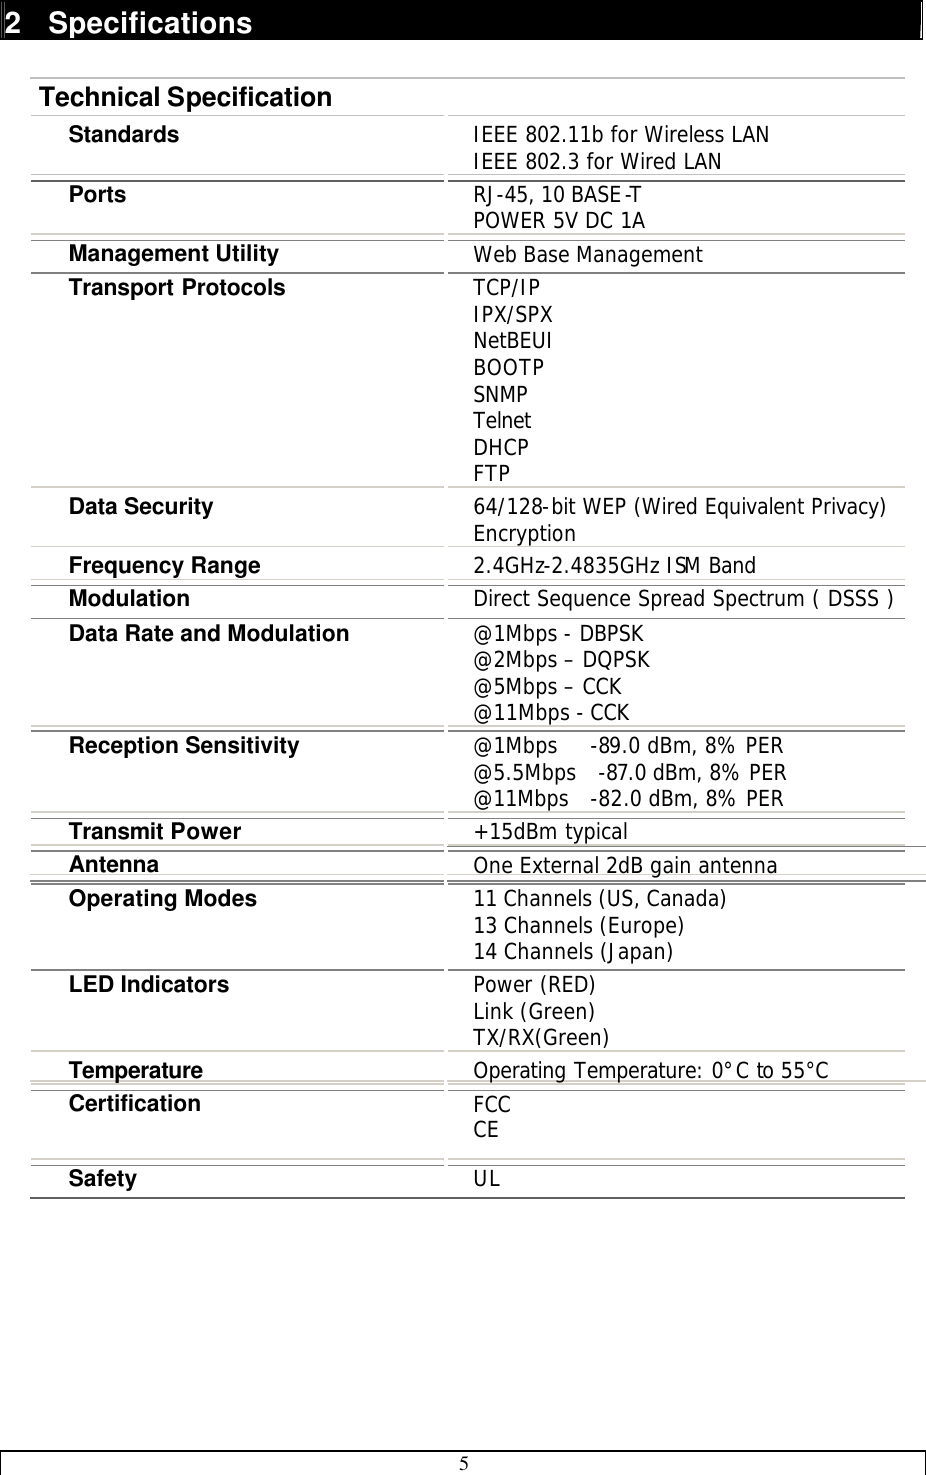 5  Product Specifications 2 Specifications   Technical Specification  Standards IEEE 802.11b for Wireless LAN IEEE 802.3 for Wired LAN Ports RJ-45, 10 BASE-T POWER 5V DC 1A Management Utility Web Base Management Transport Protocols TCP/IP IPX/SPX NetBEUI BOOTP SNMP Telnet DHCP FTP Data Security 64/128-bit WEP (Wired Equivalent Privacy) Encryption Frequency Range 2.4GHz-2.4835GHz ISM Band Modulation Direct Sequence Spread Spectrum ( DSSS ) Data Rate and Modulation @1Mbps - DBPSK @2Mbps – DQPSK @5Mbps – CCK @11Mbps - CCK Reception Sensitivity @1Mbps   -89.0 dBm, 8% PER @5.5Mbps  -87.0 dBm, 8% PER @11Mbps  -82.0 dBm, 8% PER Transmit Power +15dBm typical Antenna One External 2dB gain antenna Operating Modes 11 Channels (US, Canada) 13 Channels (Europe) 14 Channels (Japan) LED Indicators   Power (RED) Link (Green) TX/RX(Green) Temperature Operating Temperature: 0°C to 55°C Certification FCC CE Safety UL  